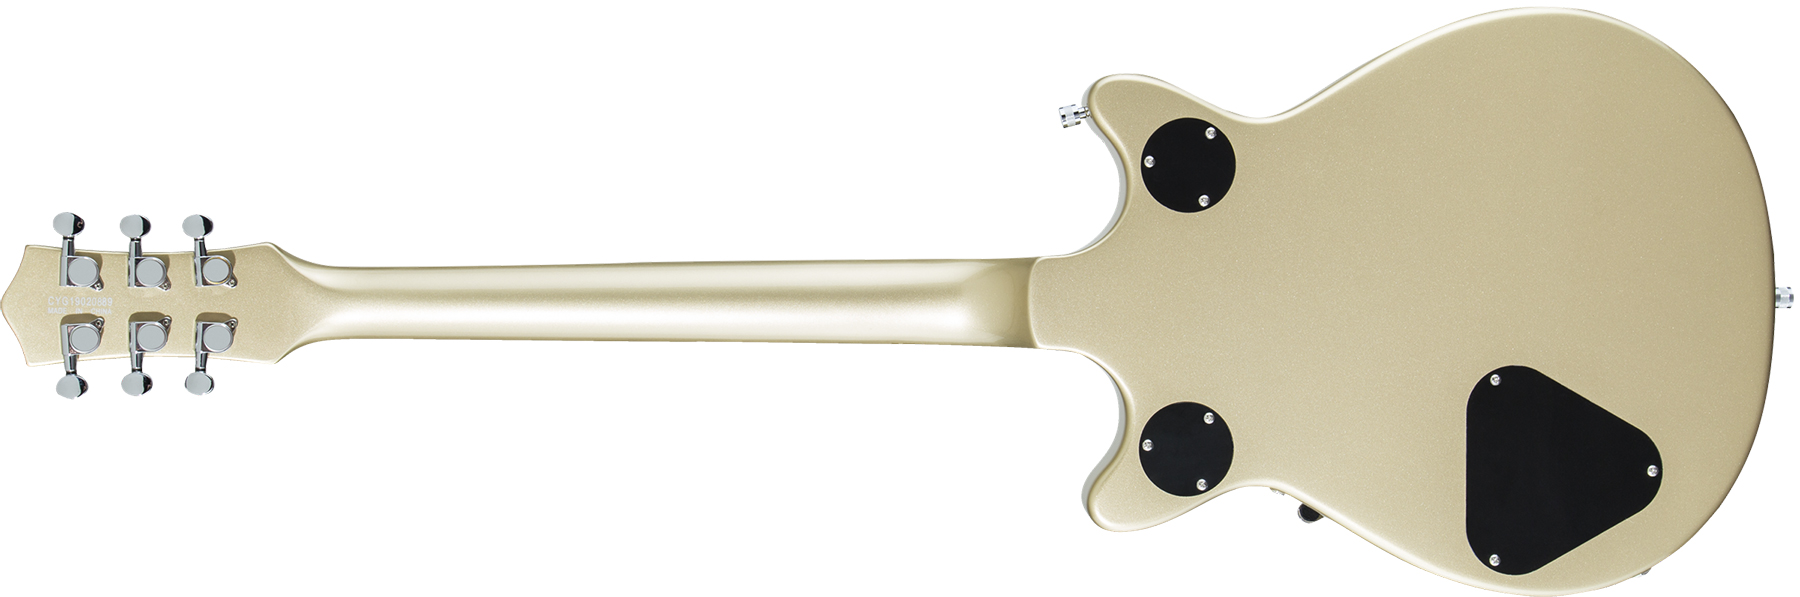 Gretsch G5232t Electromatic Double Jet Ft 2019 Hh Bigsby Lau - Casino Gold - Double cut electric guitar - Variation 1